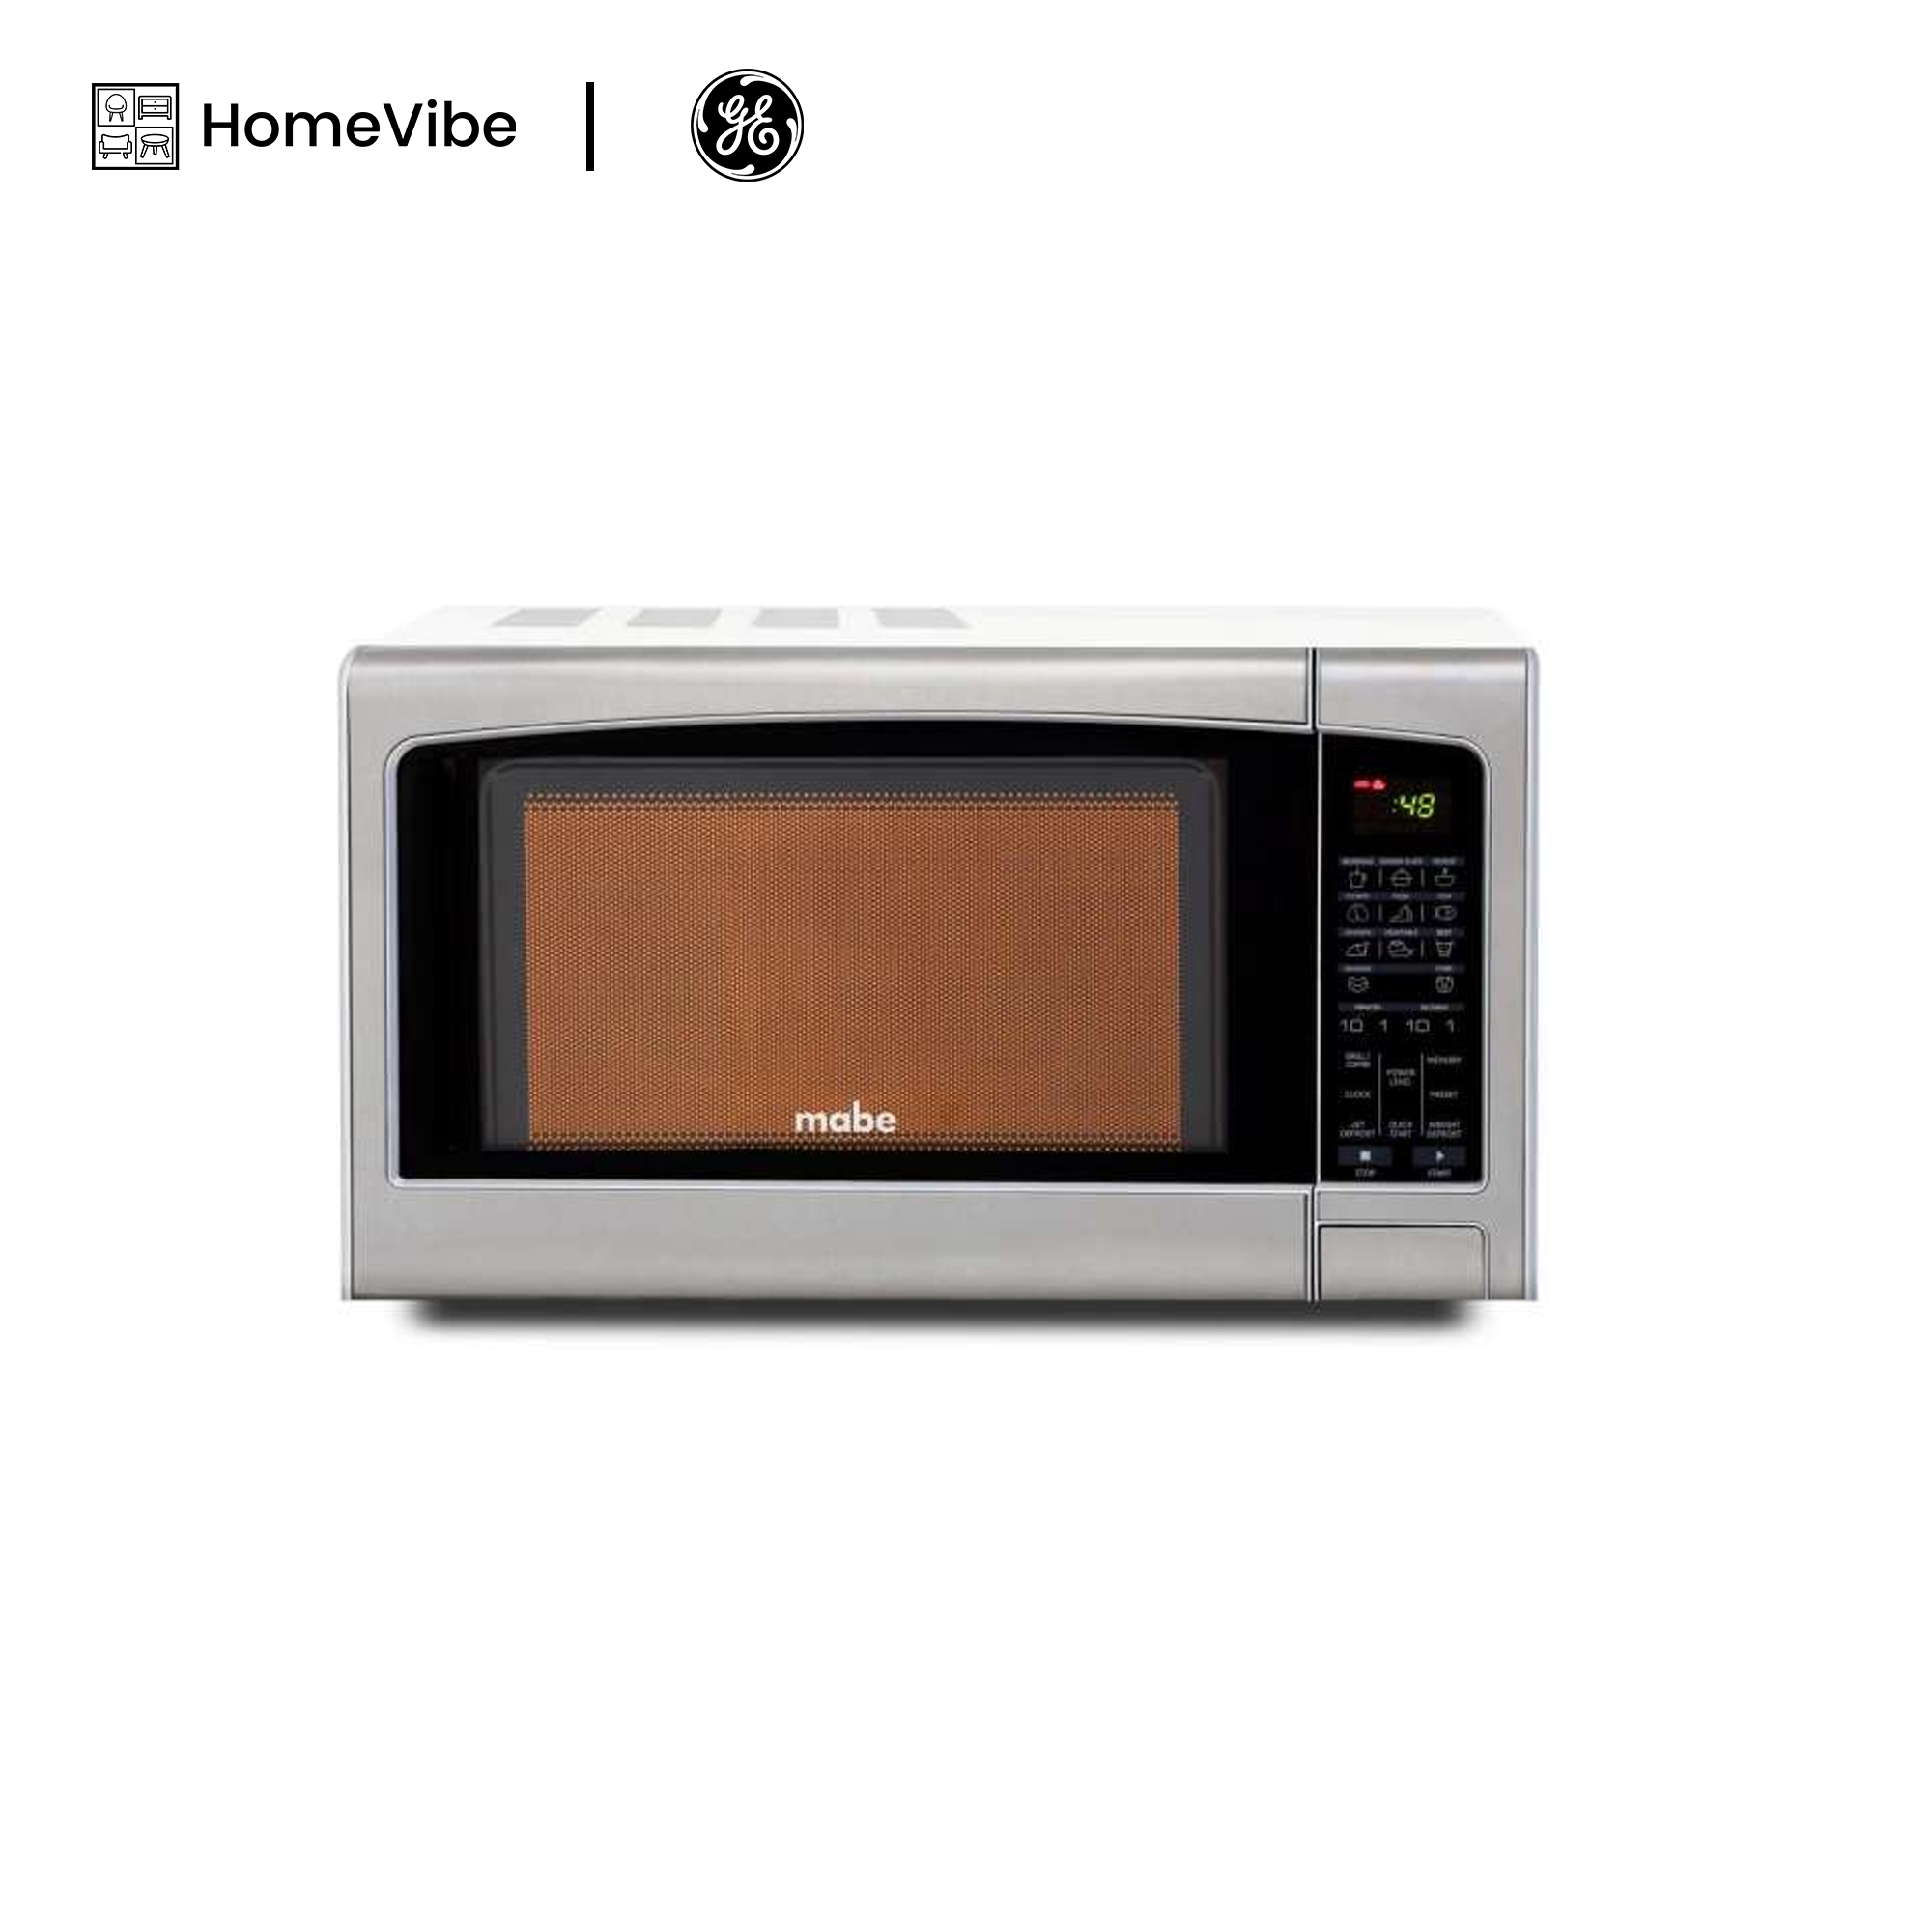 Mabe 30L/1.06 cuft Capacity Digital Control Countertop Microwave Oven MEI3070DVSI with Grill Function SKU: 0107SA100004